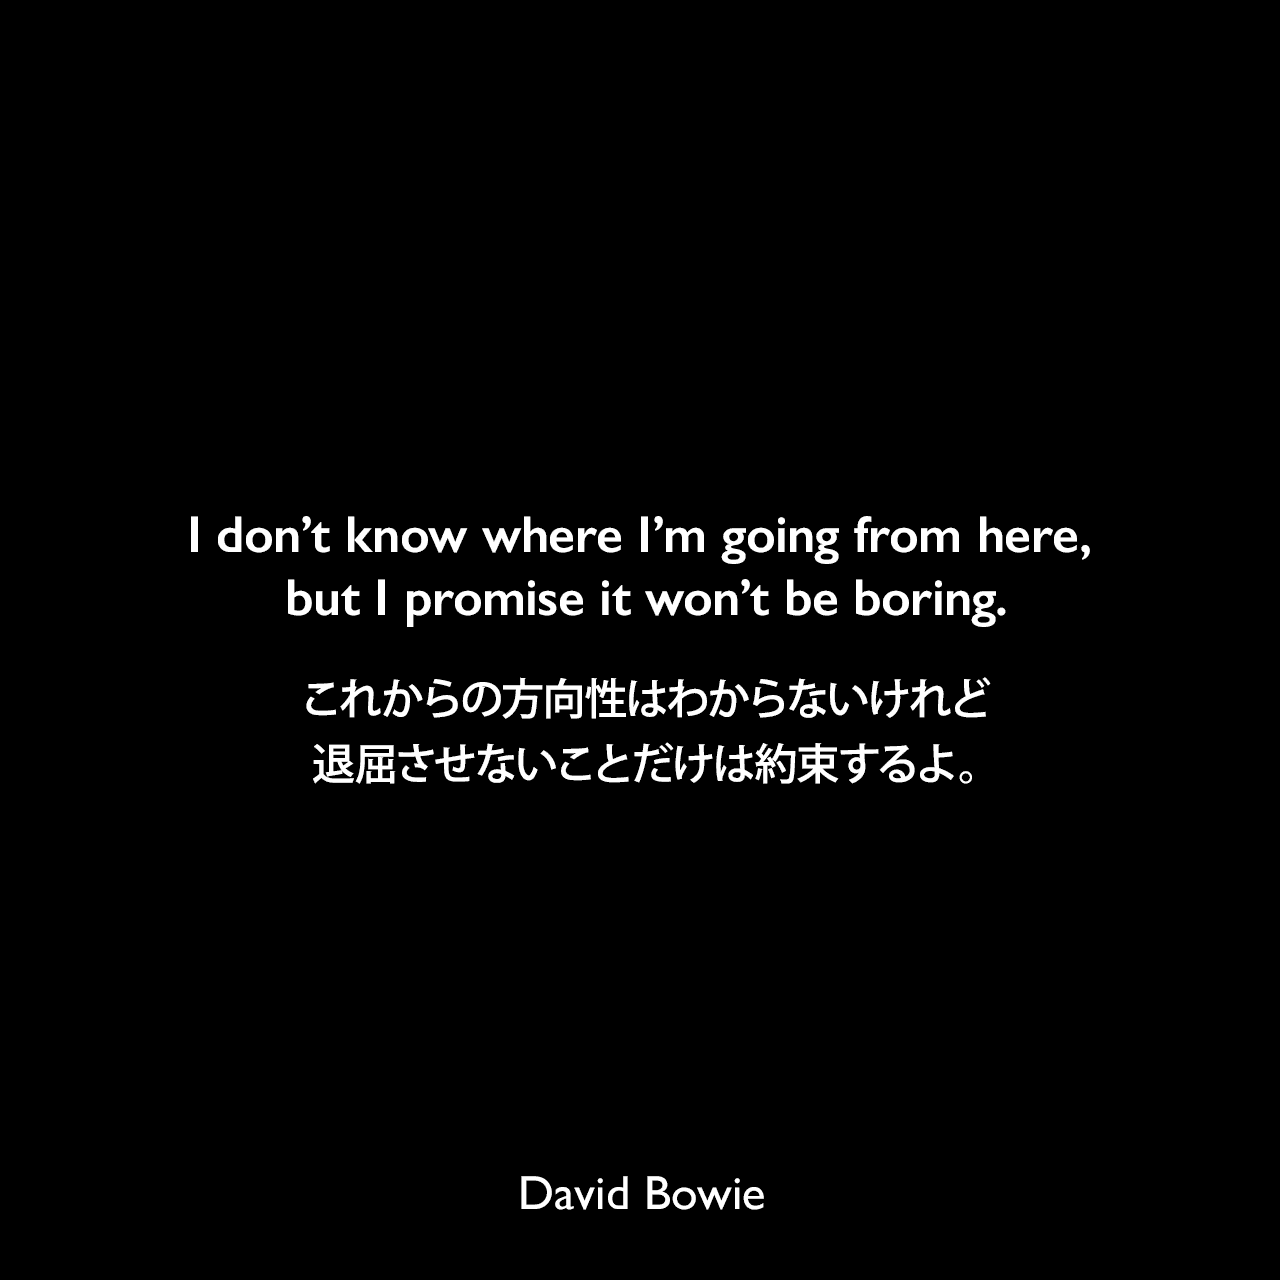 I don’t know where I’m going from here, but I promise it won’t be boring.これからの方向性はわからないけれど、退屈させないことだけは約束するよ。David Bowie